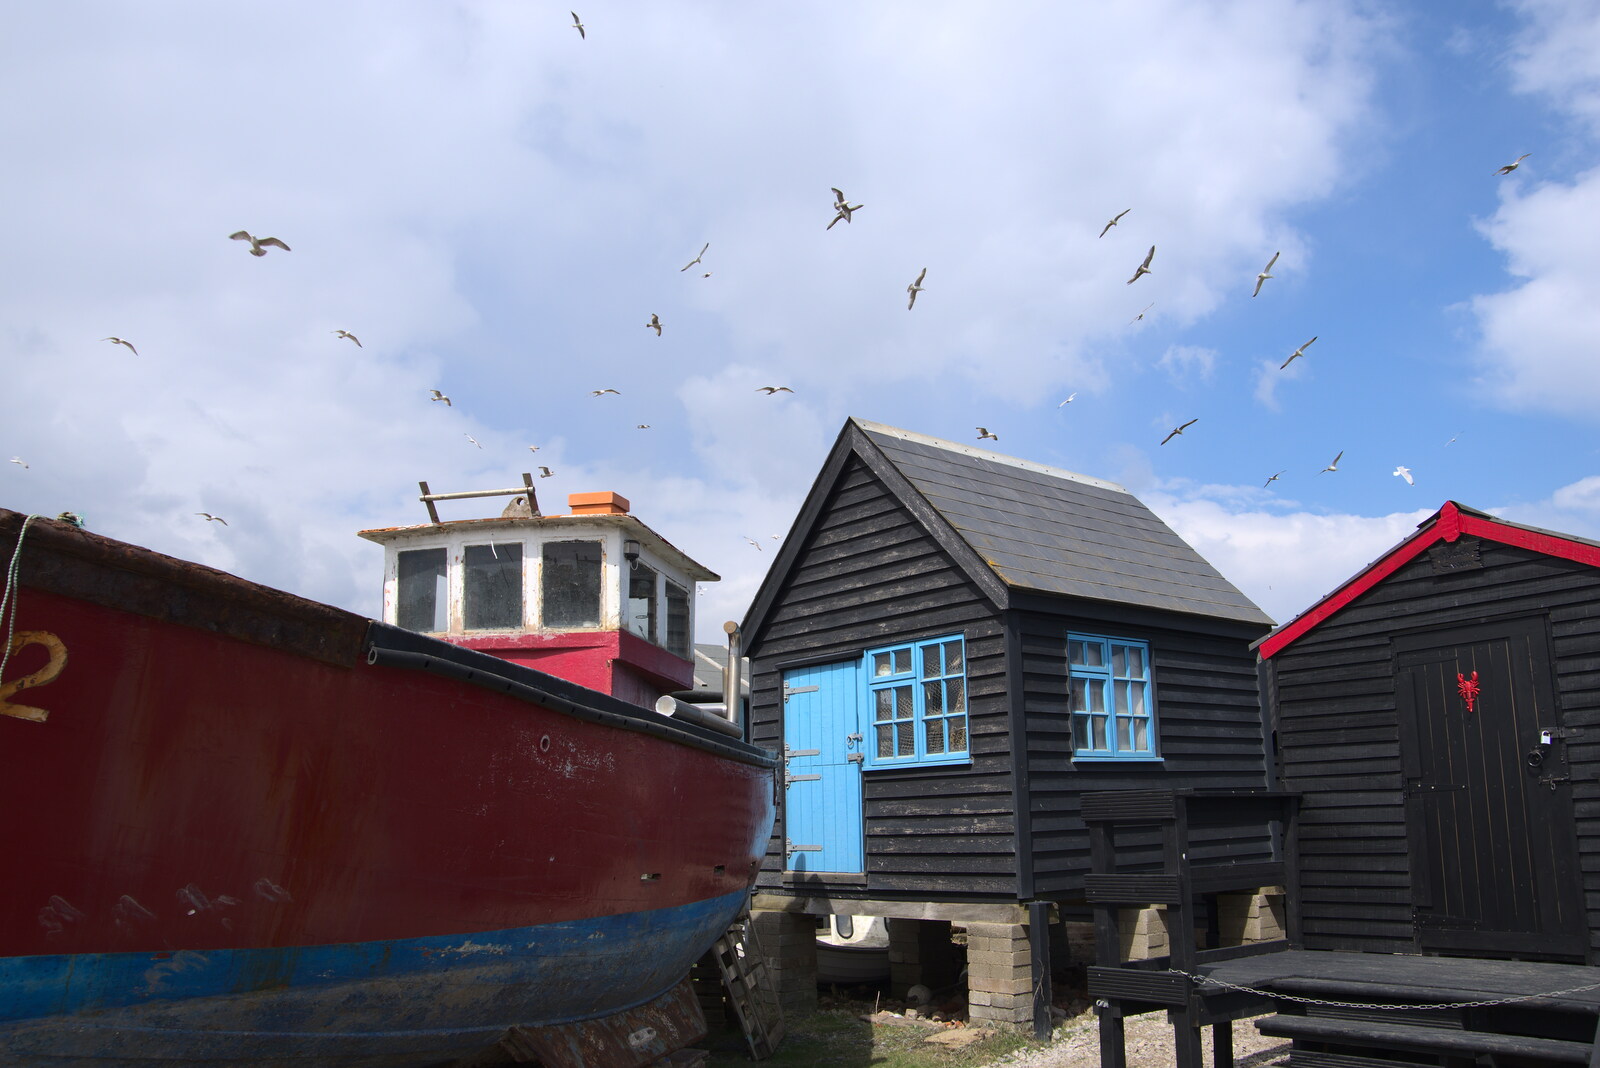 Gulls explode into the air over the huts from A Chilly Trip to the Beach, Southwold Harbour, Suffolk - 2nd May 2021